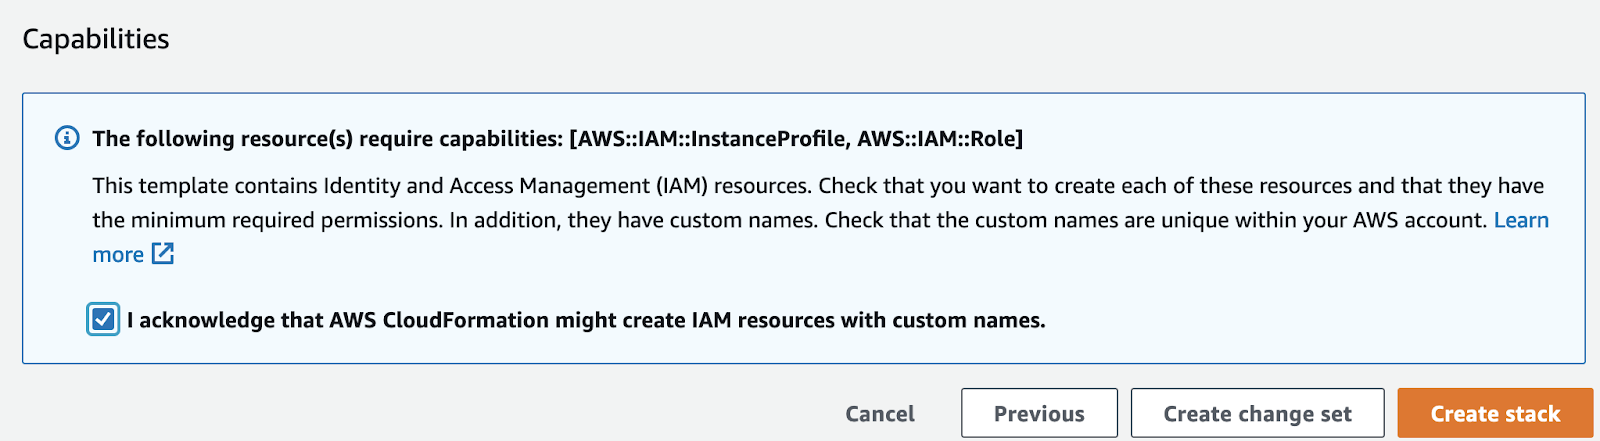 ../../../_images/create-aws-stack.png